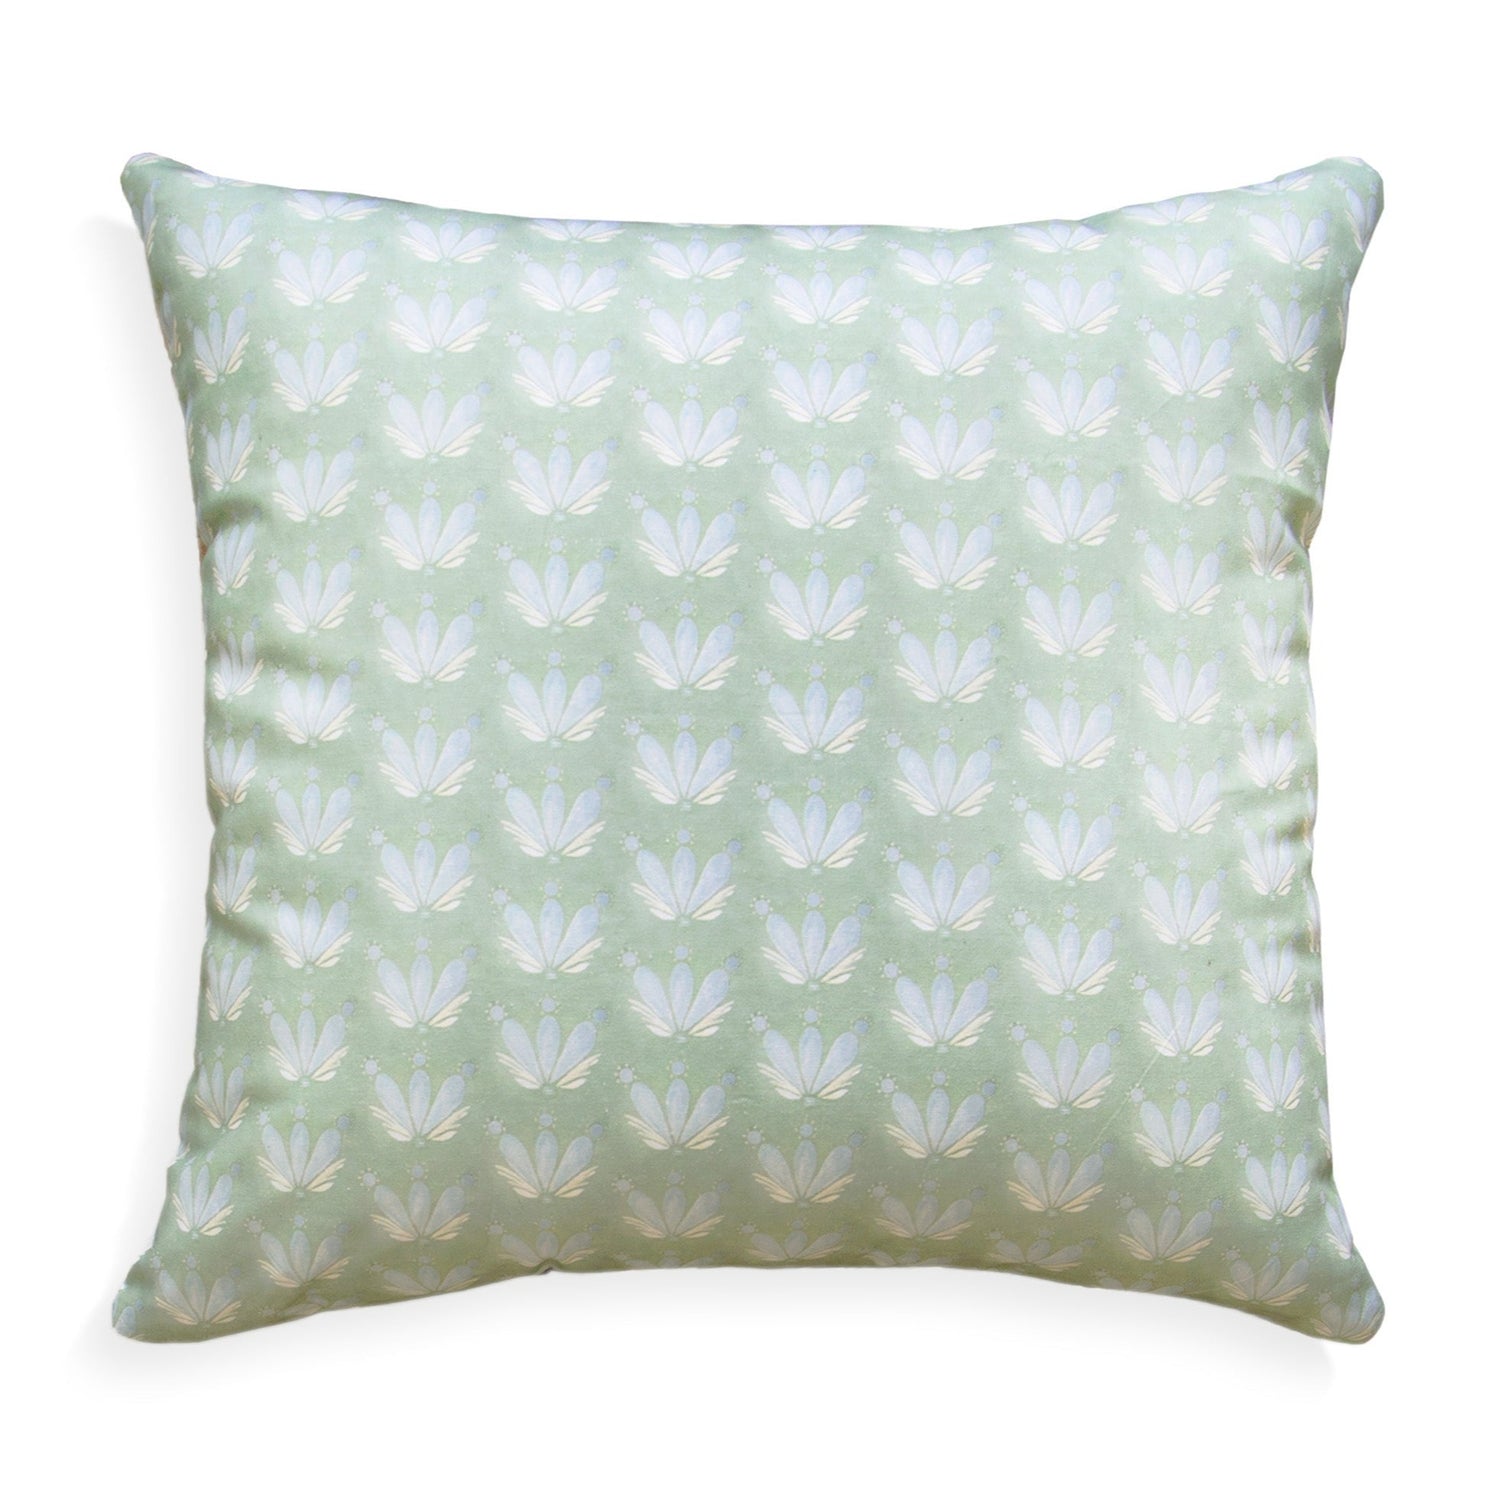 Blue & Green Floral Drop Repeat Printed Pillow